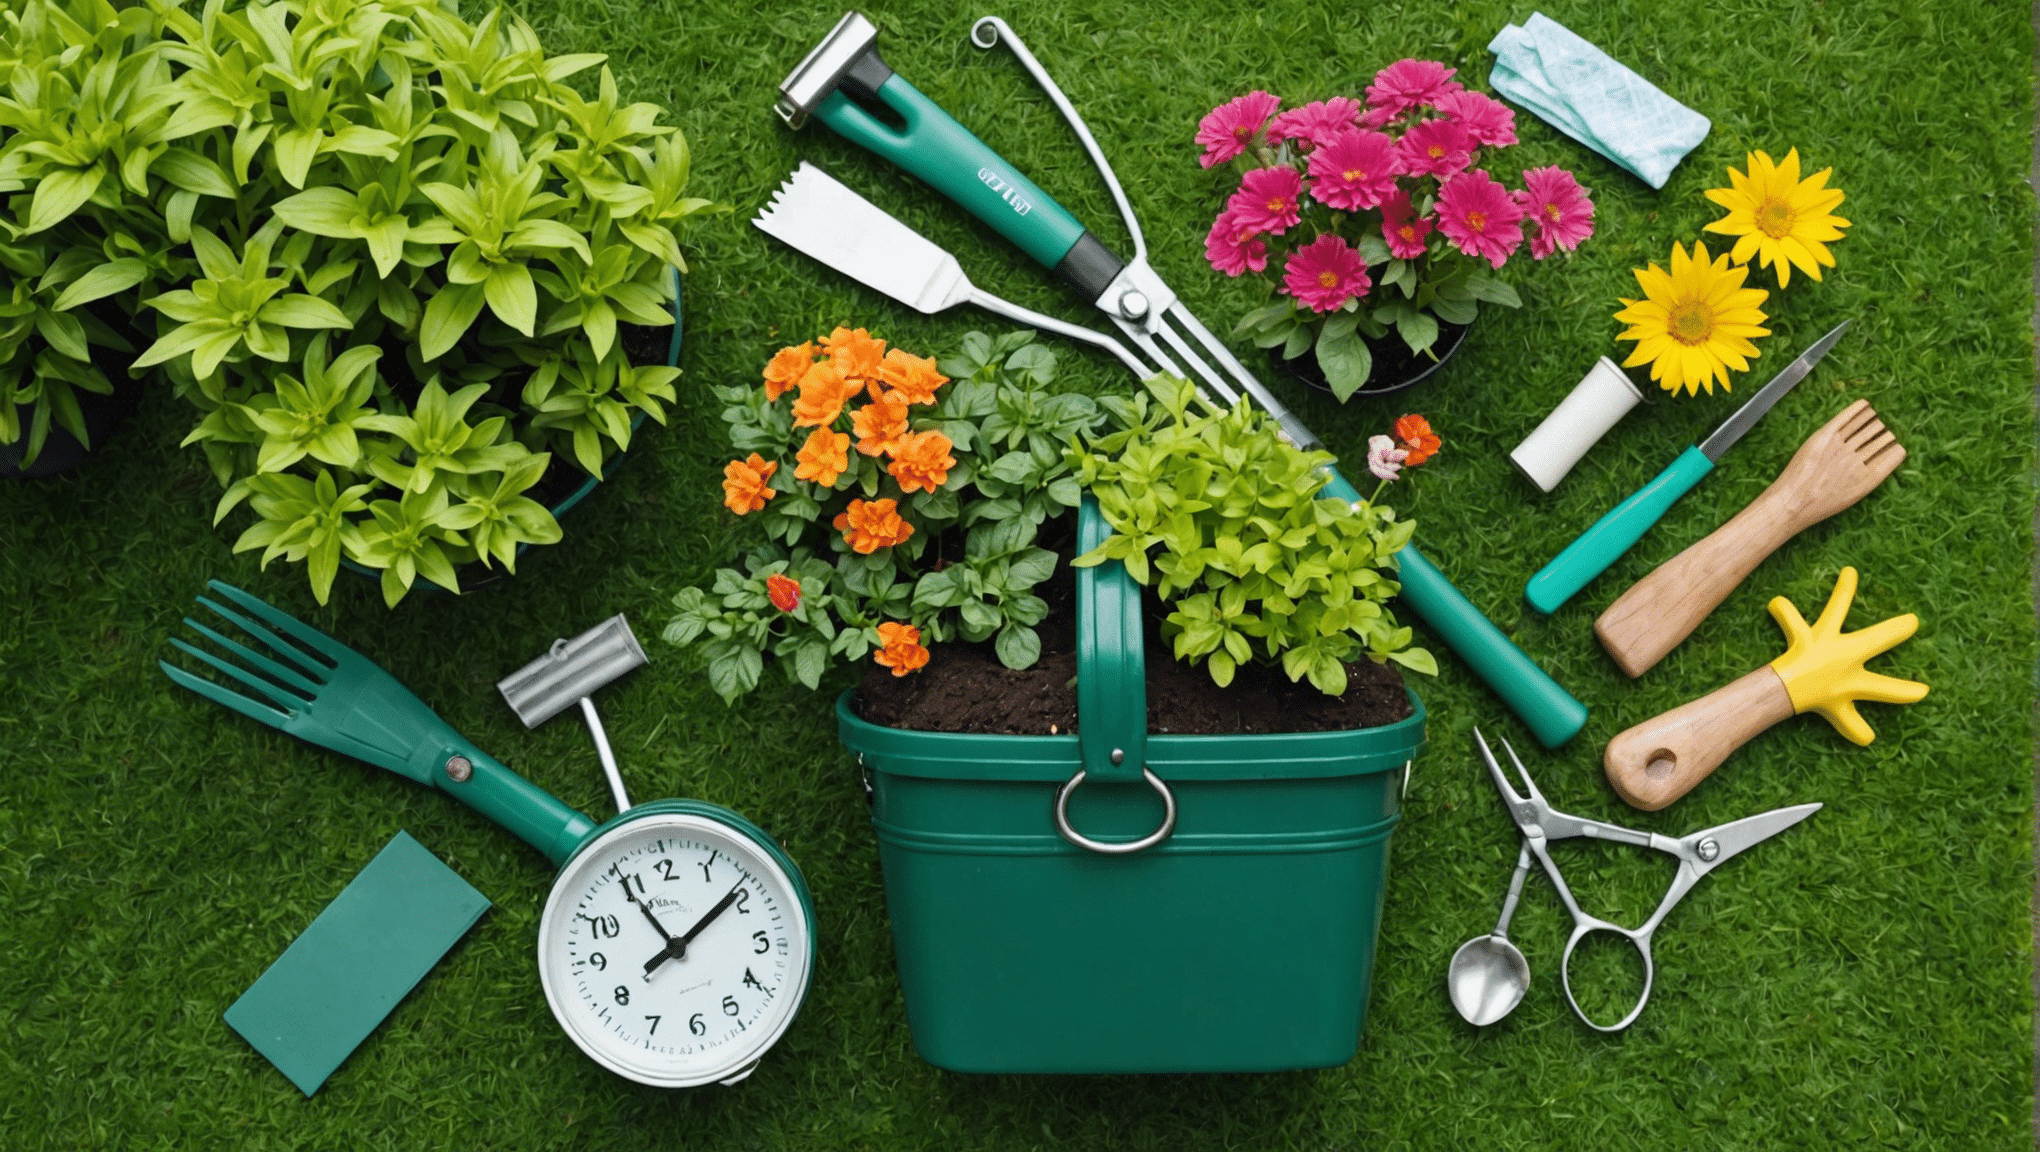 discover the top items to include in your gardening bag. learn how to pack for success with these essential tools and supplies.